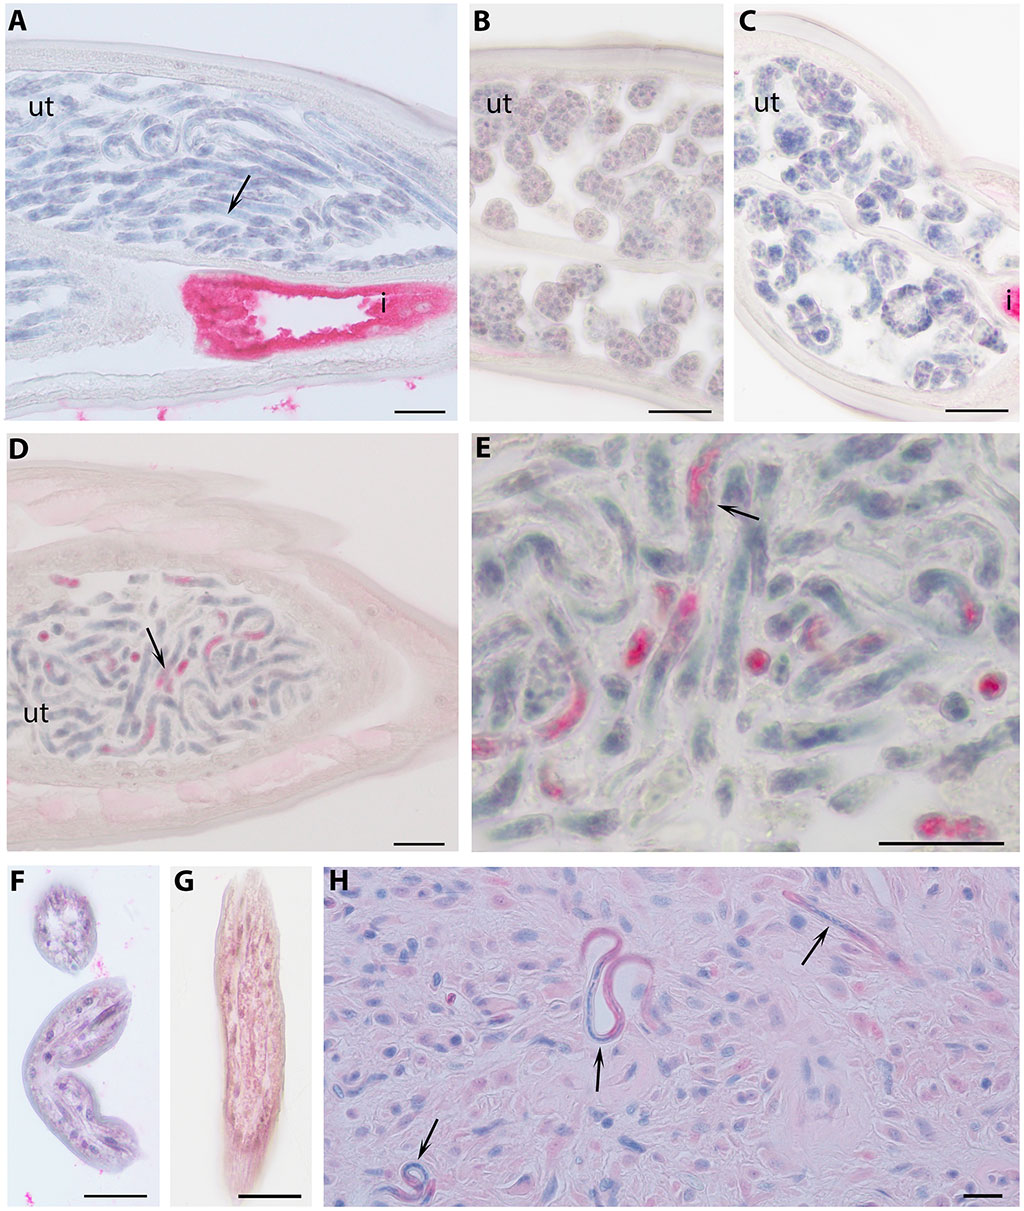 Image: Immunolocalization of BmR1 homologues showing immunohistochemical results from worm sections that were processed (Photo courtesy of Washington University School of Medicine)